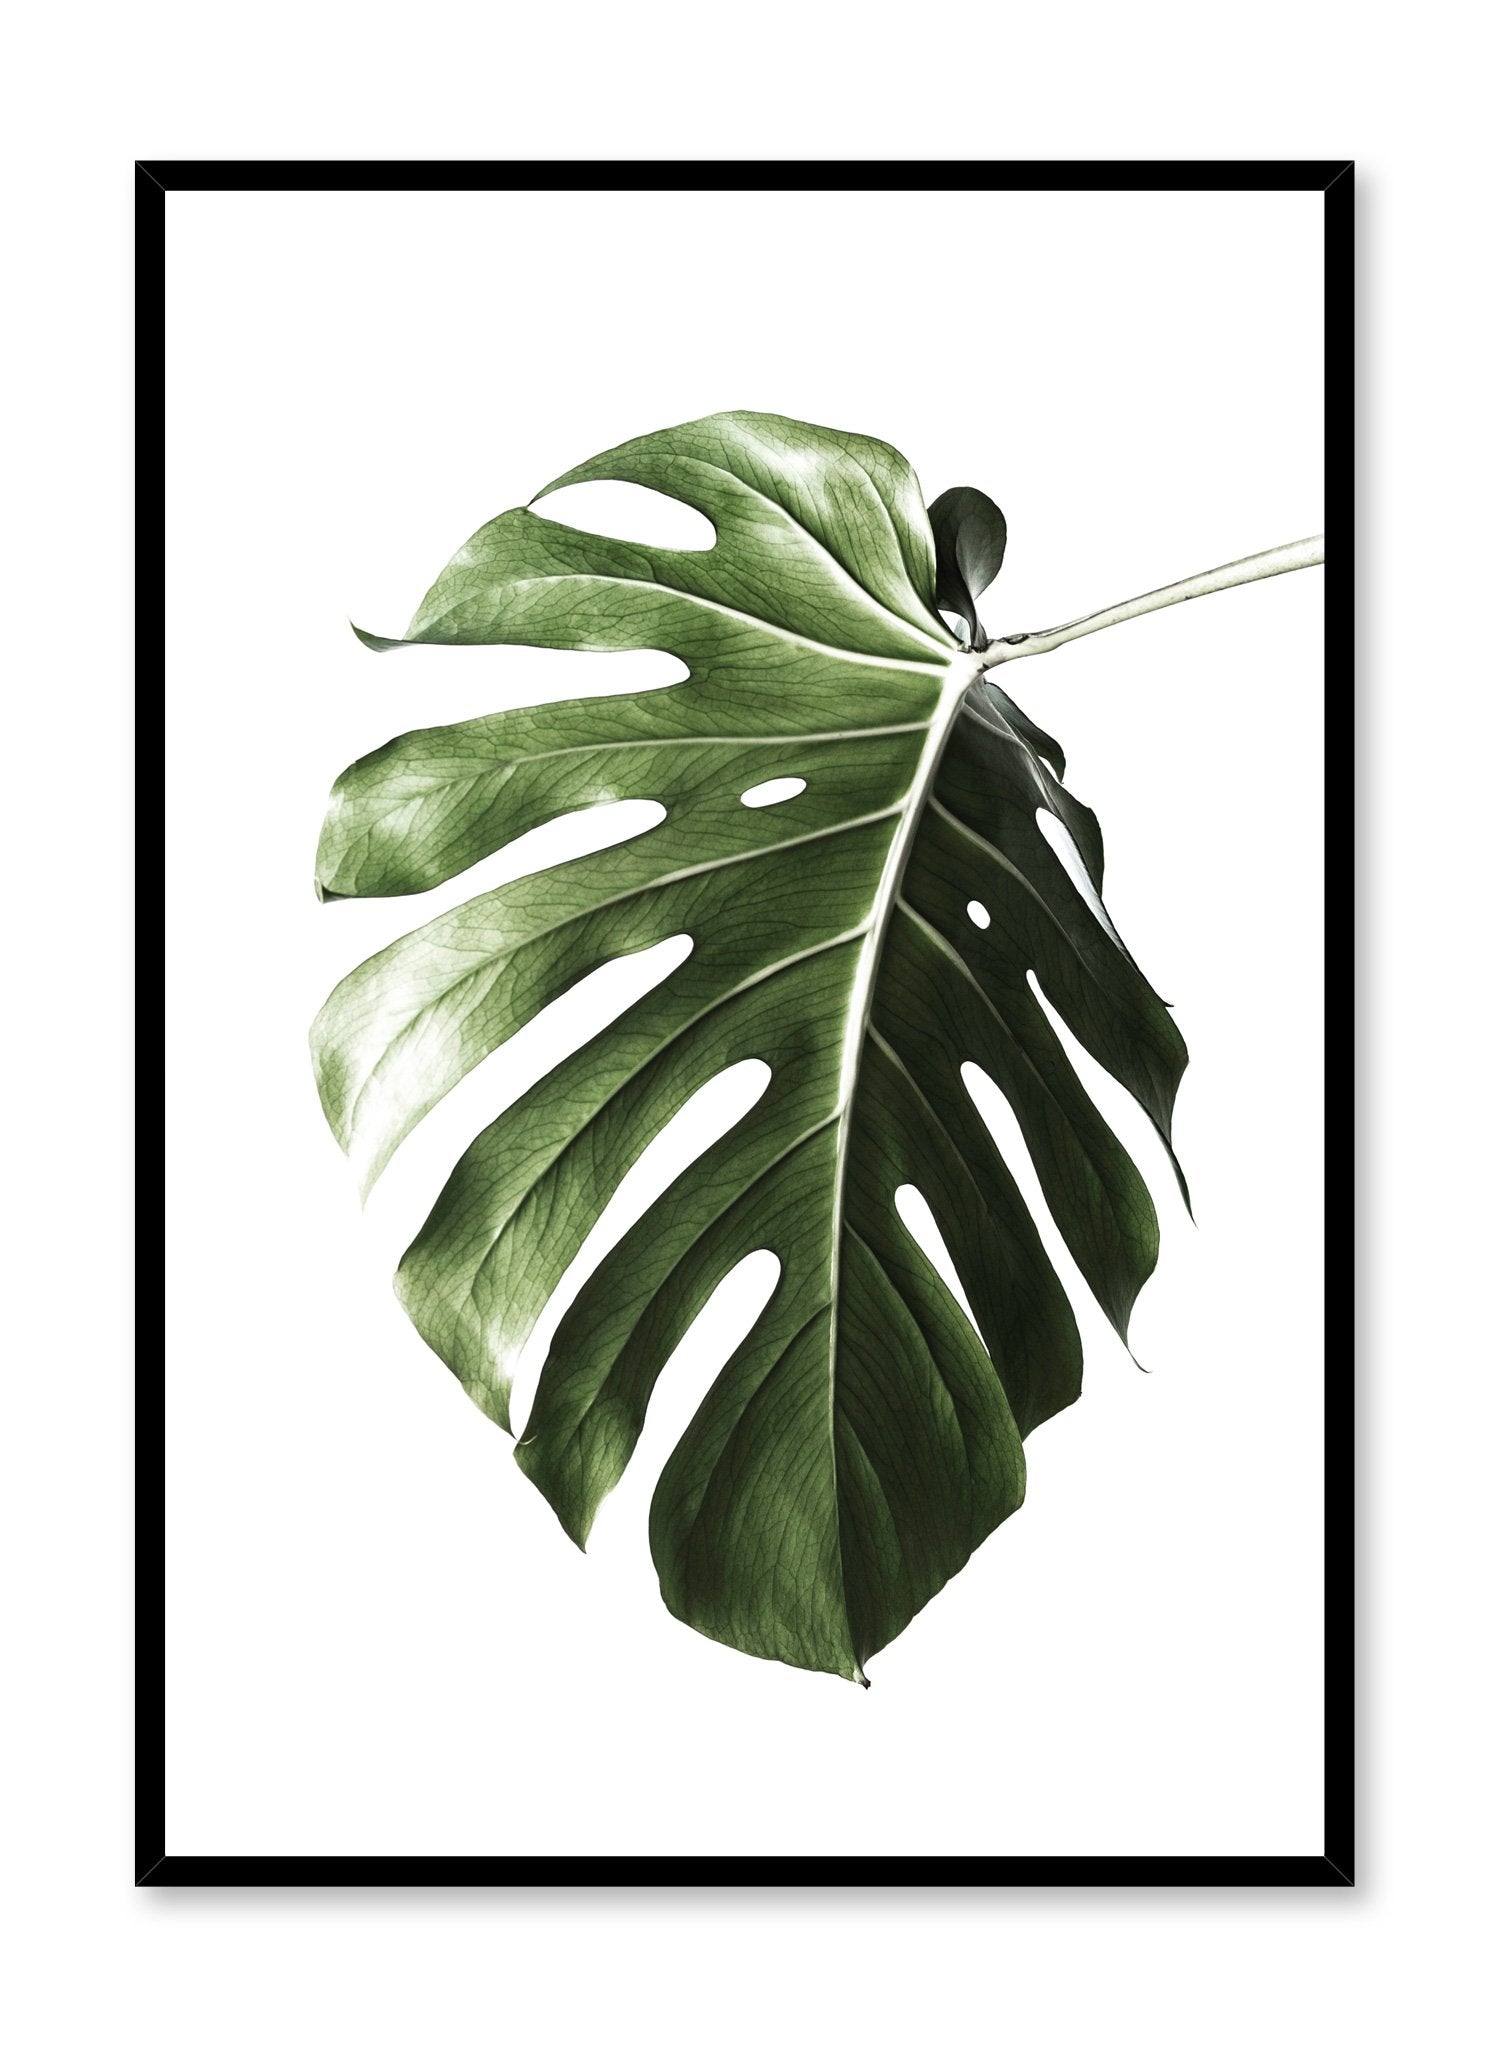 Scandinavian poster by Opposite Wall with art photo of botanical leaf called Upside Down